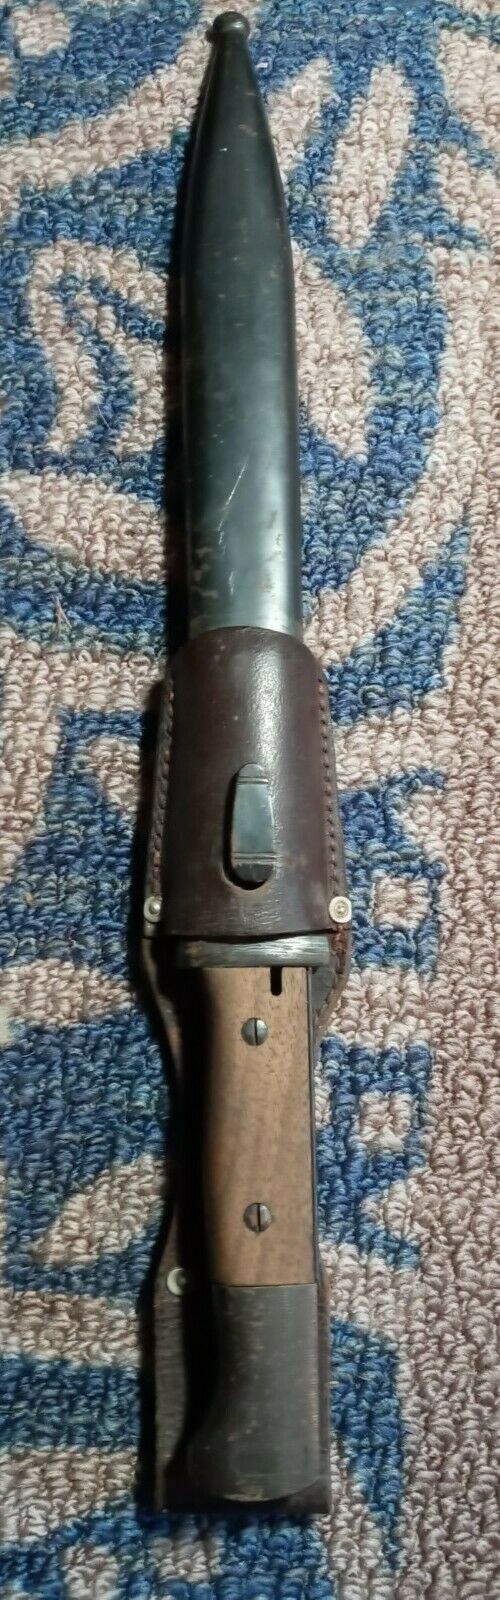 WWII German k98 Mauser bayonet not matched cof44 with original leather straps.